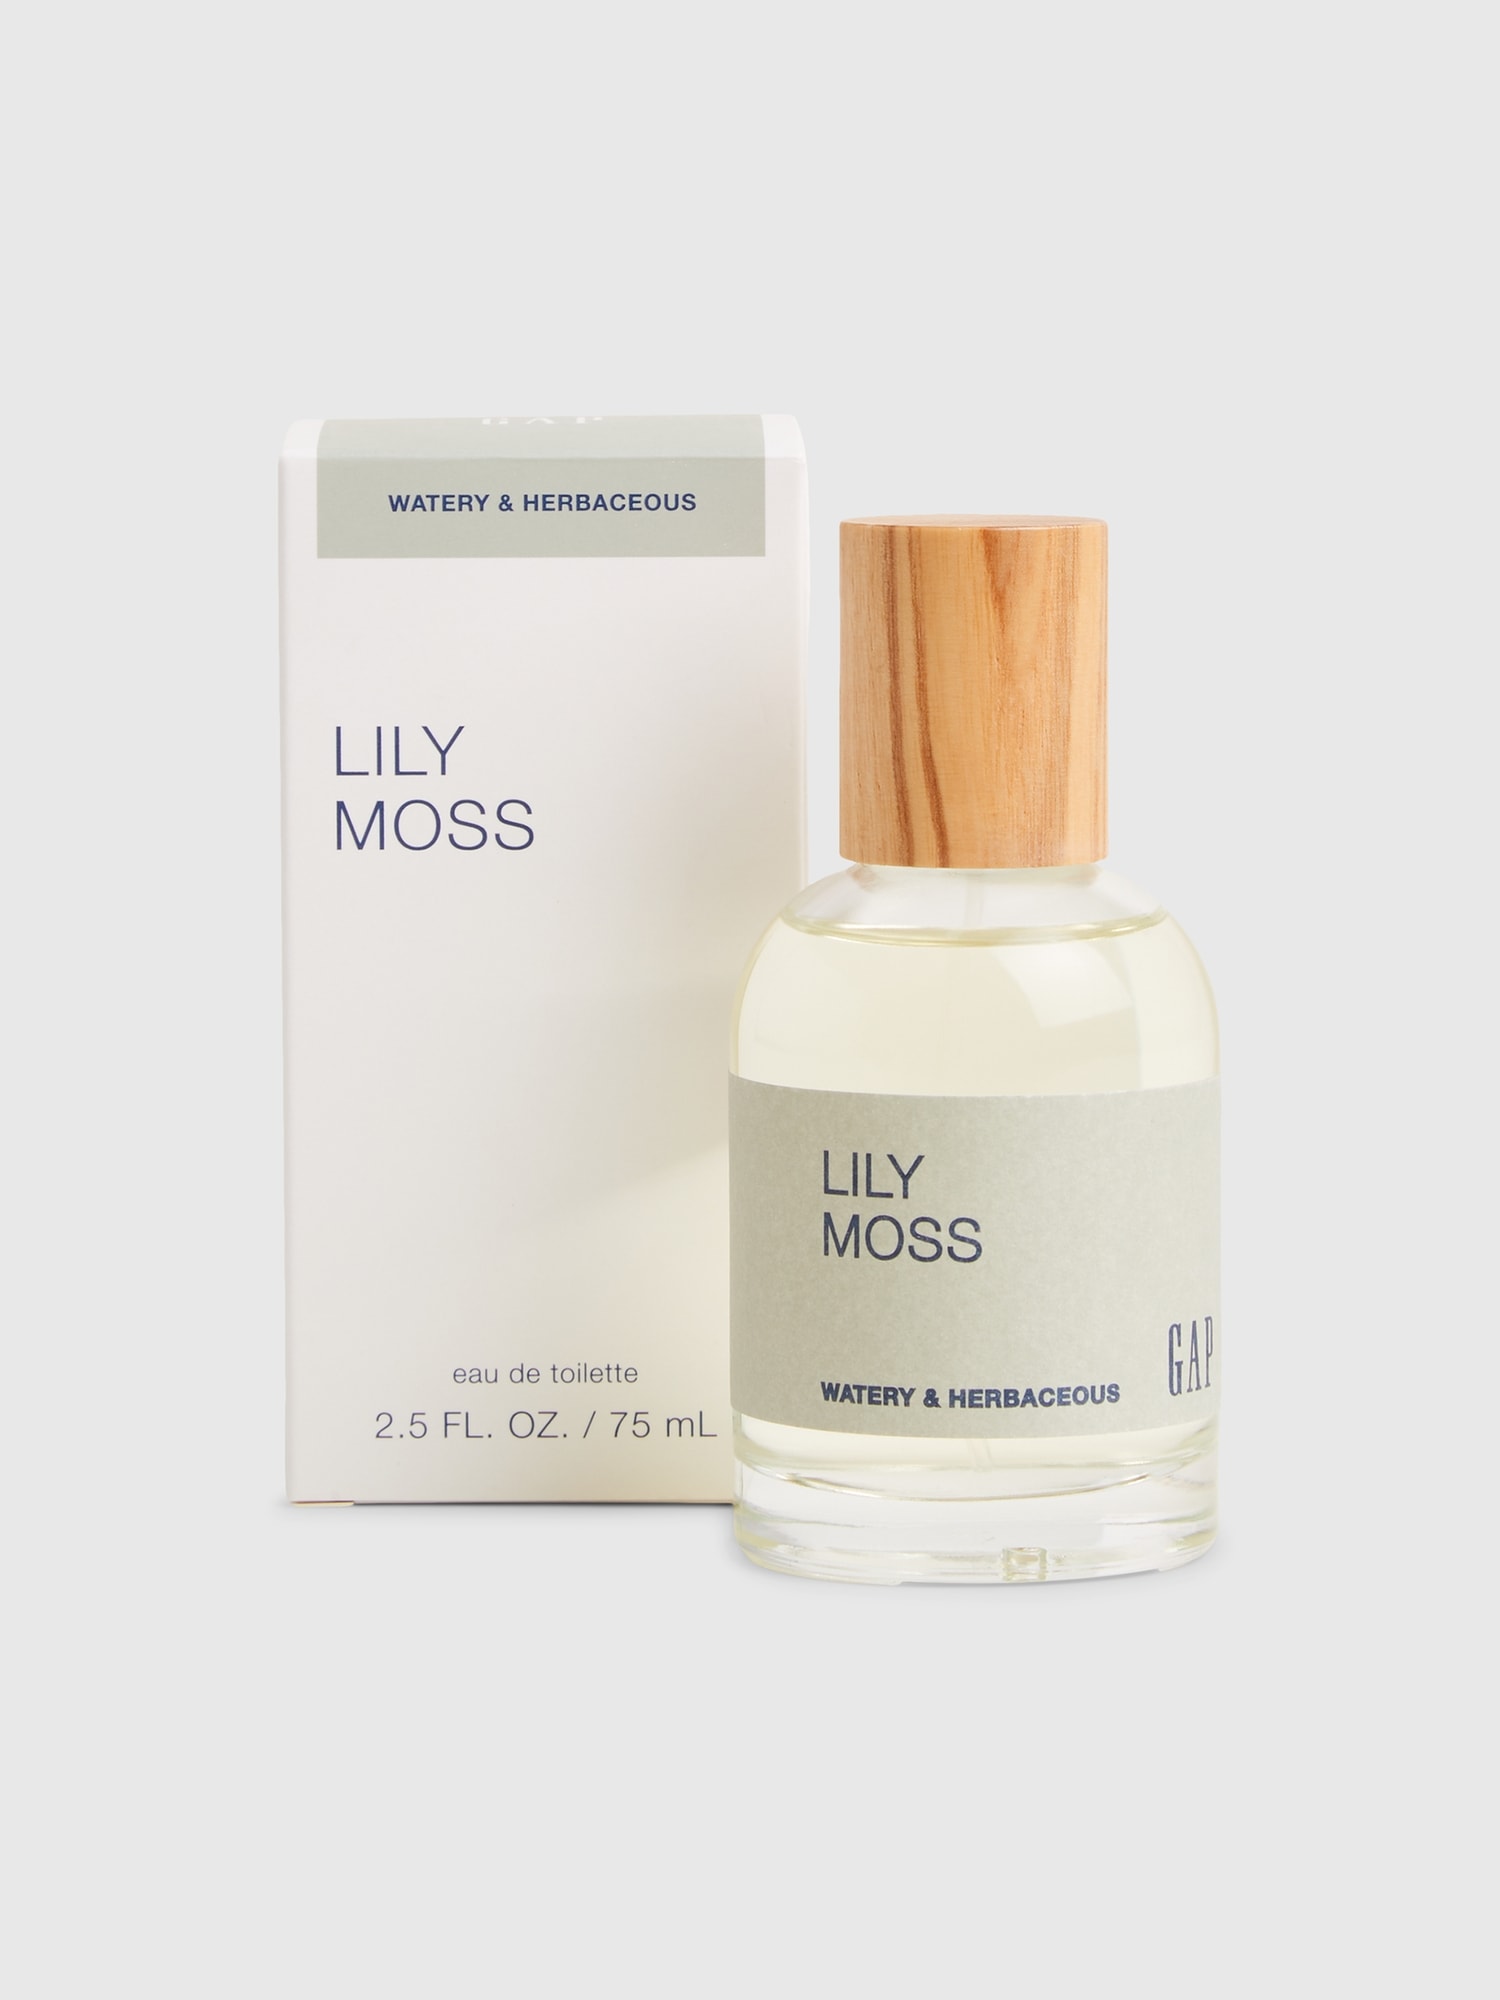 Gap Fragrance In Lily Moss